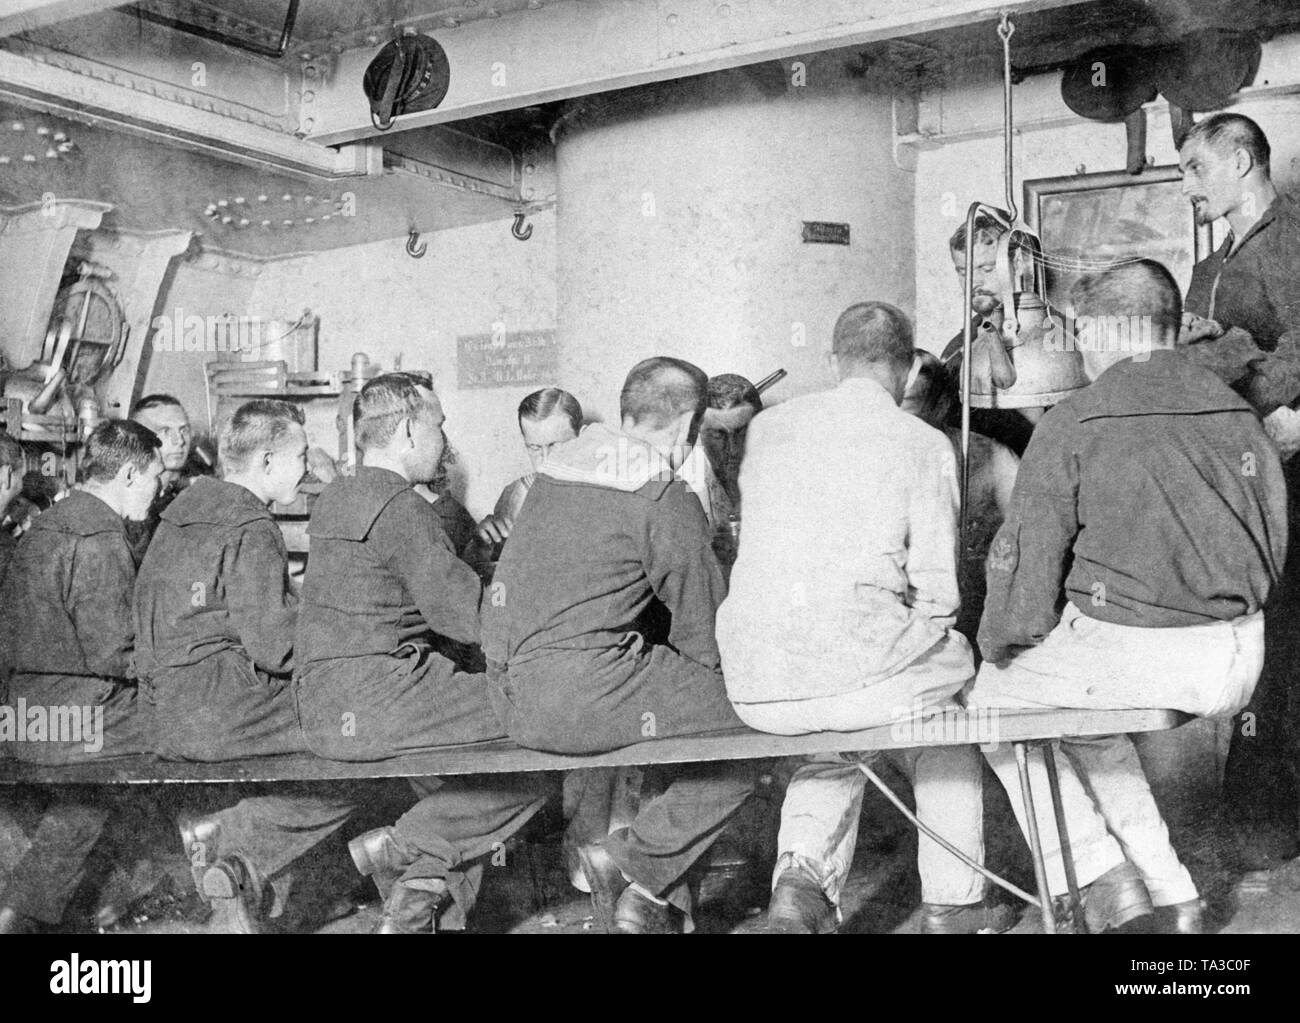 Sailors having dinner in the crew mess of a warship. Stock Photo